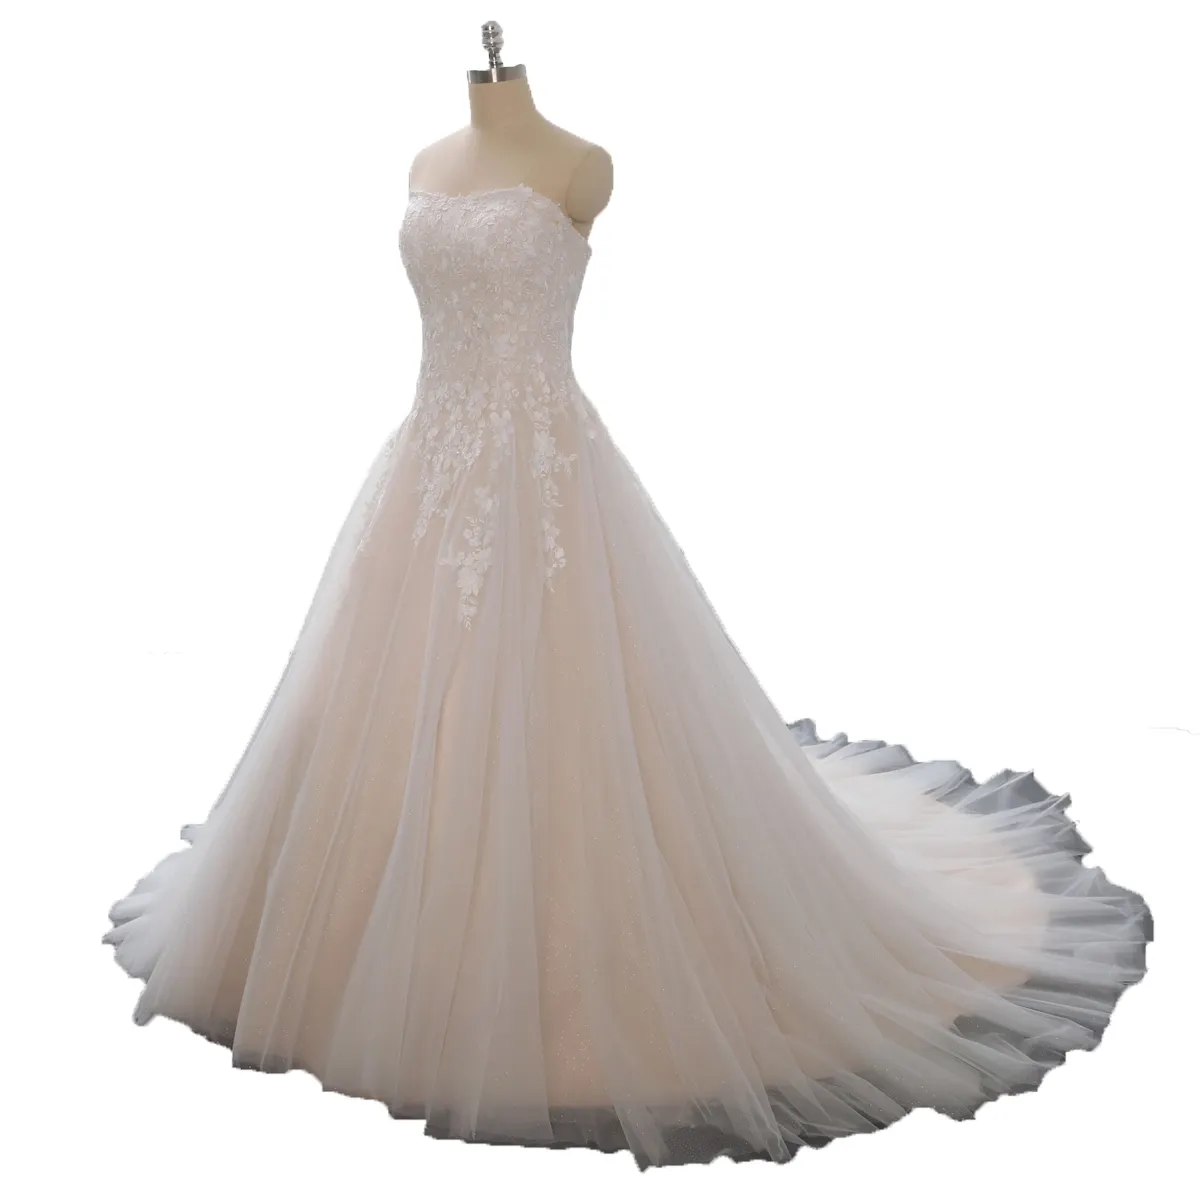 China Manufacturer 15 years blush strapless A line tulle and floral lace wedding dresses of 2021 popular designs